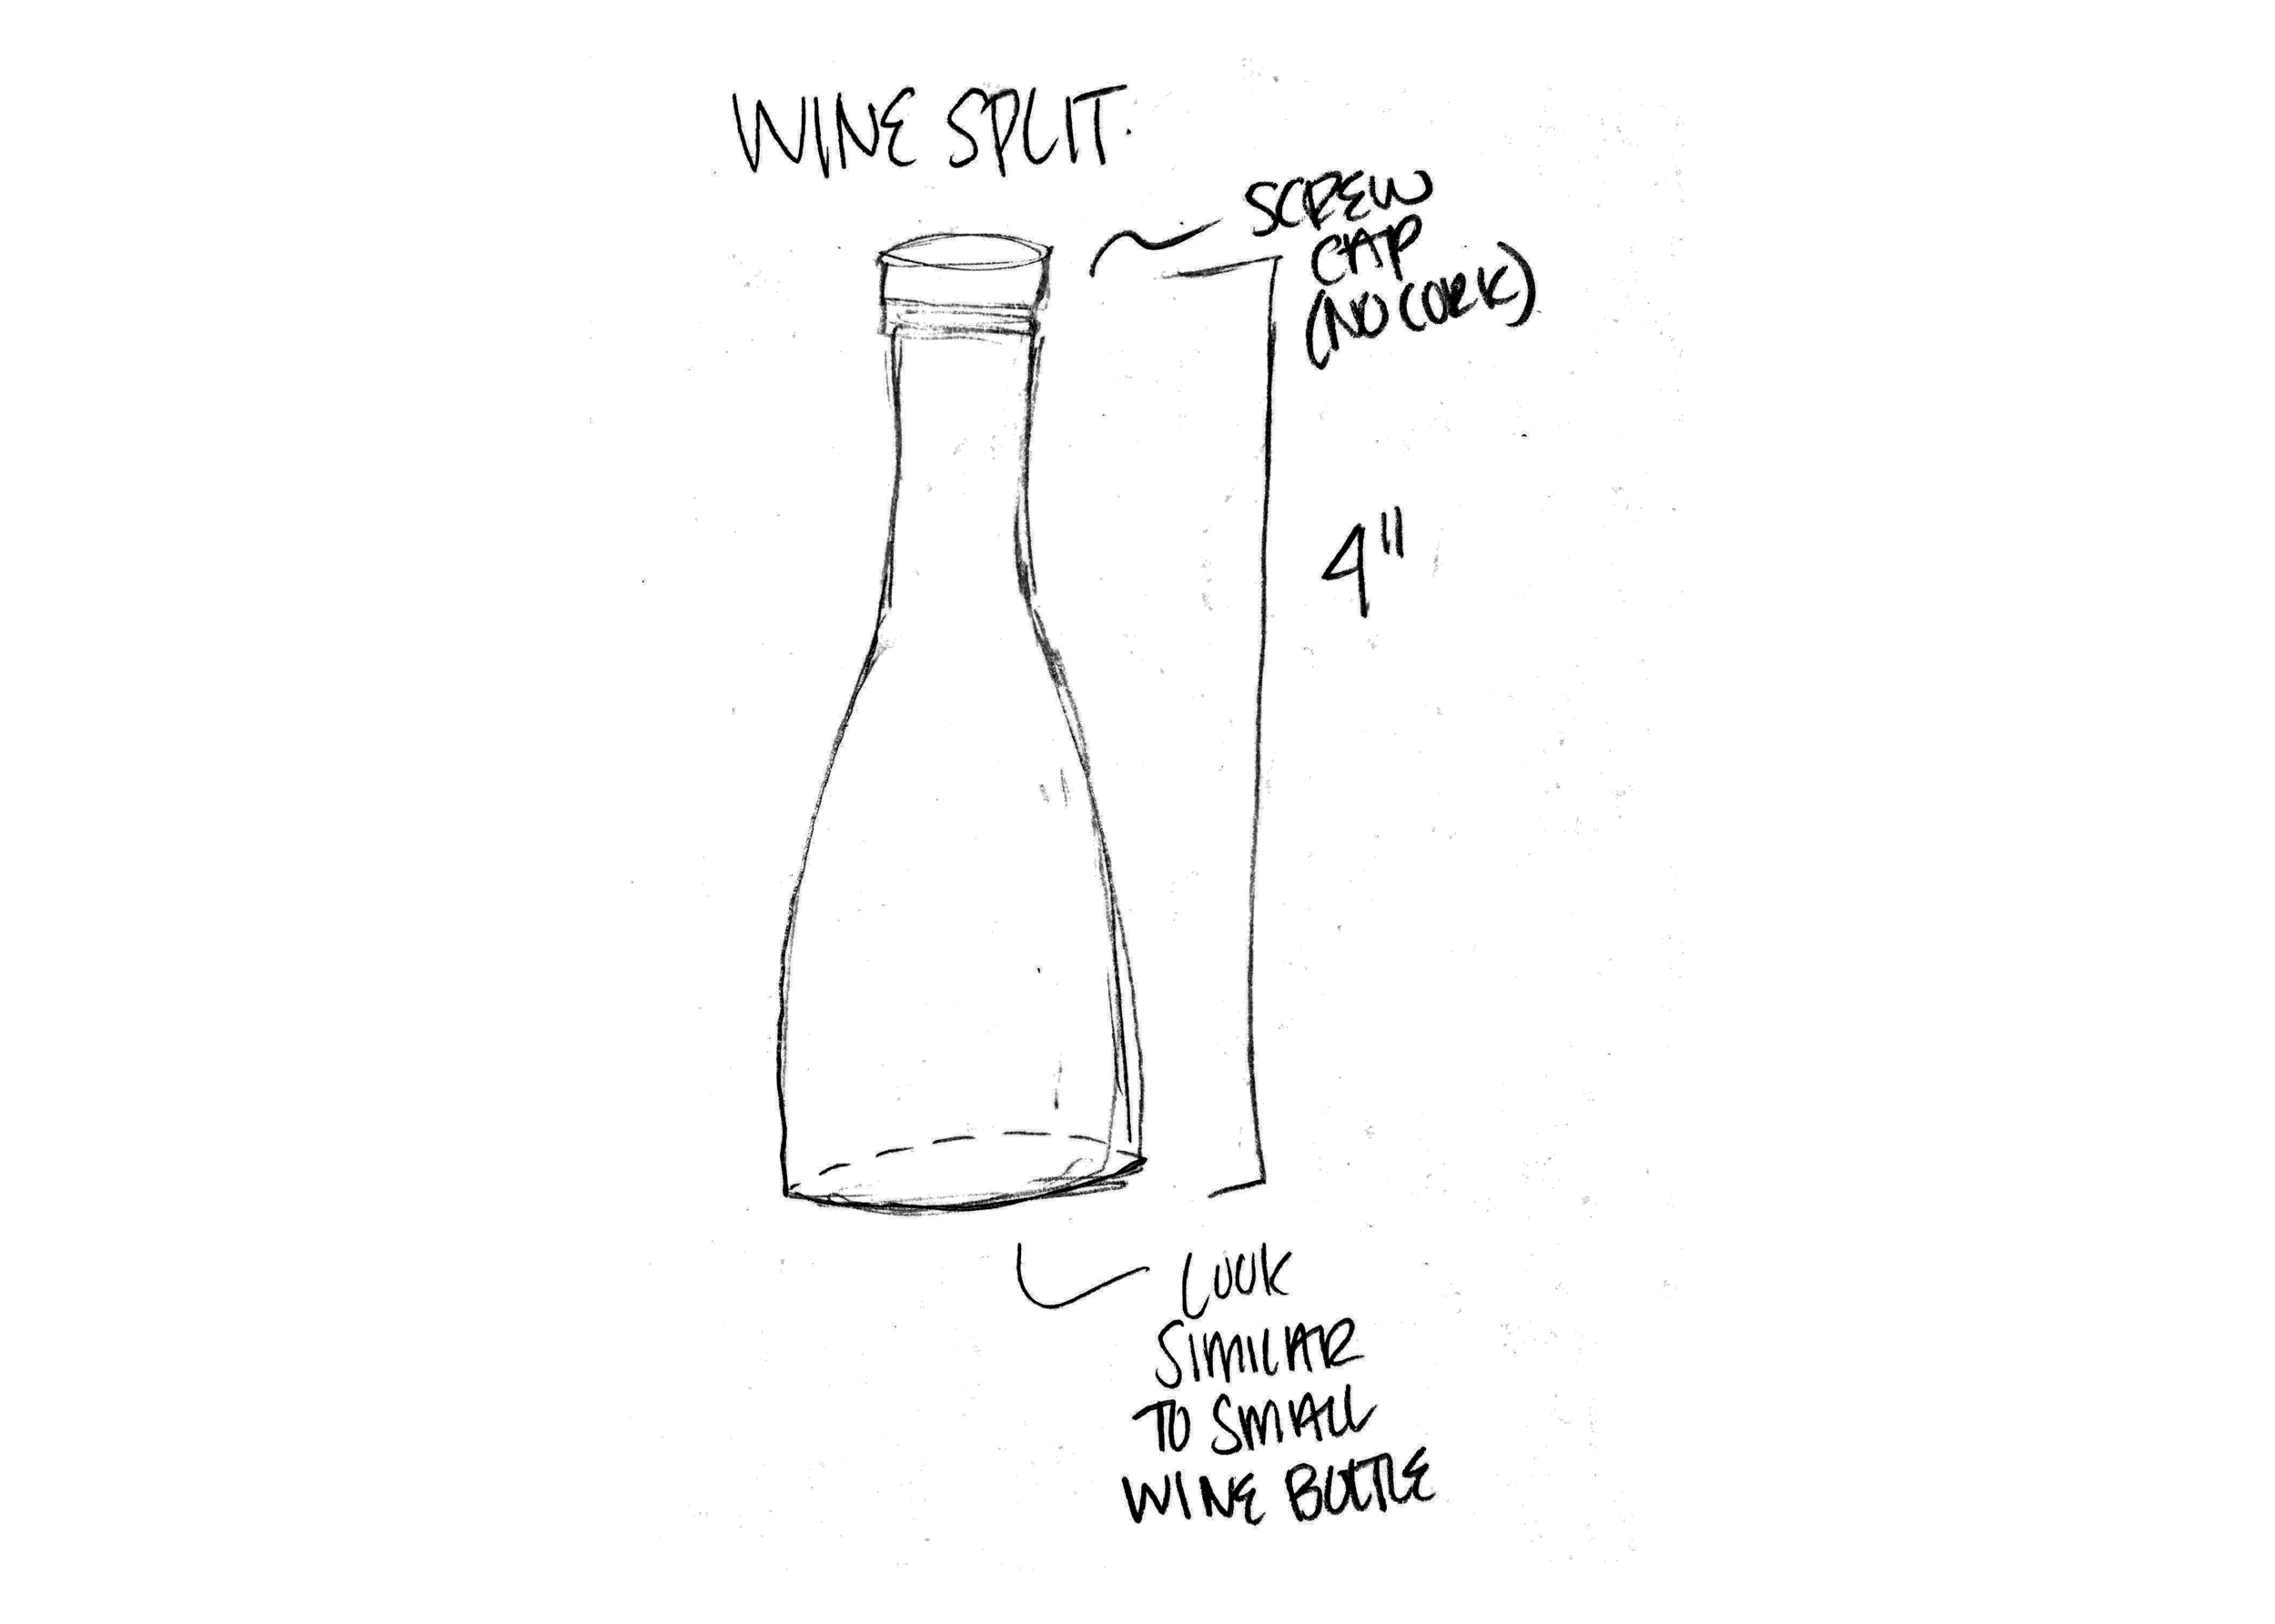  Concept drawing for the small sample wine split that would be delivered to each customer after completing the "What's Your Lucky Number?" Quiz online! 